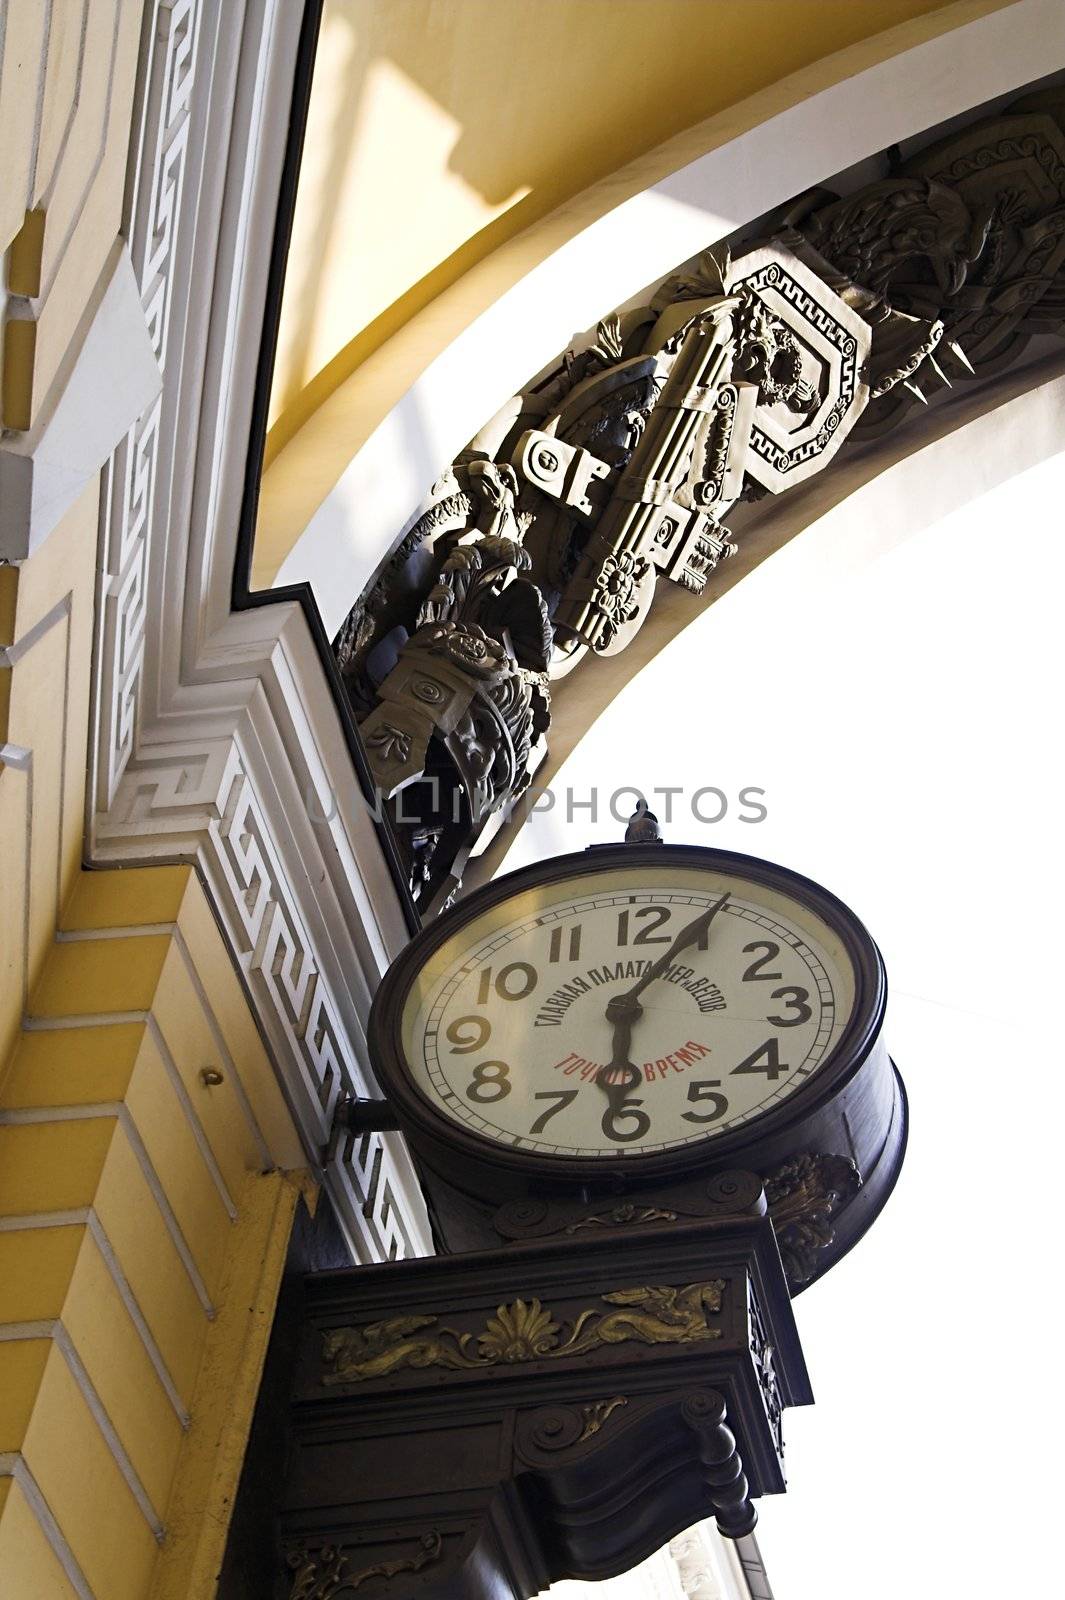 Old-style Public Clocks under the General Army Staff Building Arch in Saint Petersburg, Russia. The inscription on the clock-face: State Chamber for Measuring and Weighing (upper, 19th century designation, now out of use) and Exact Time (bottom).